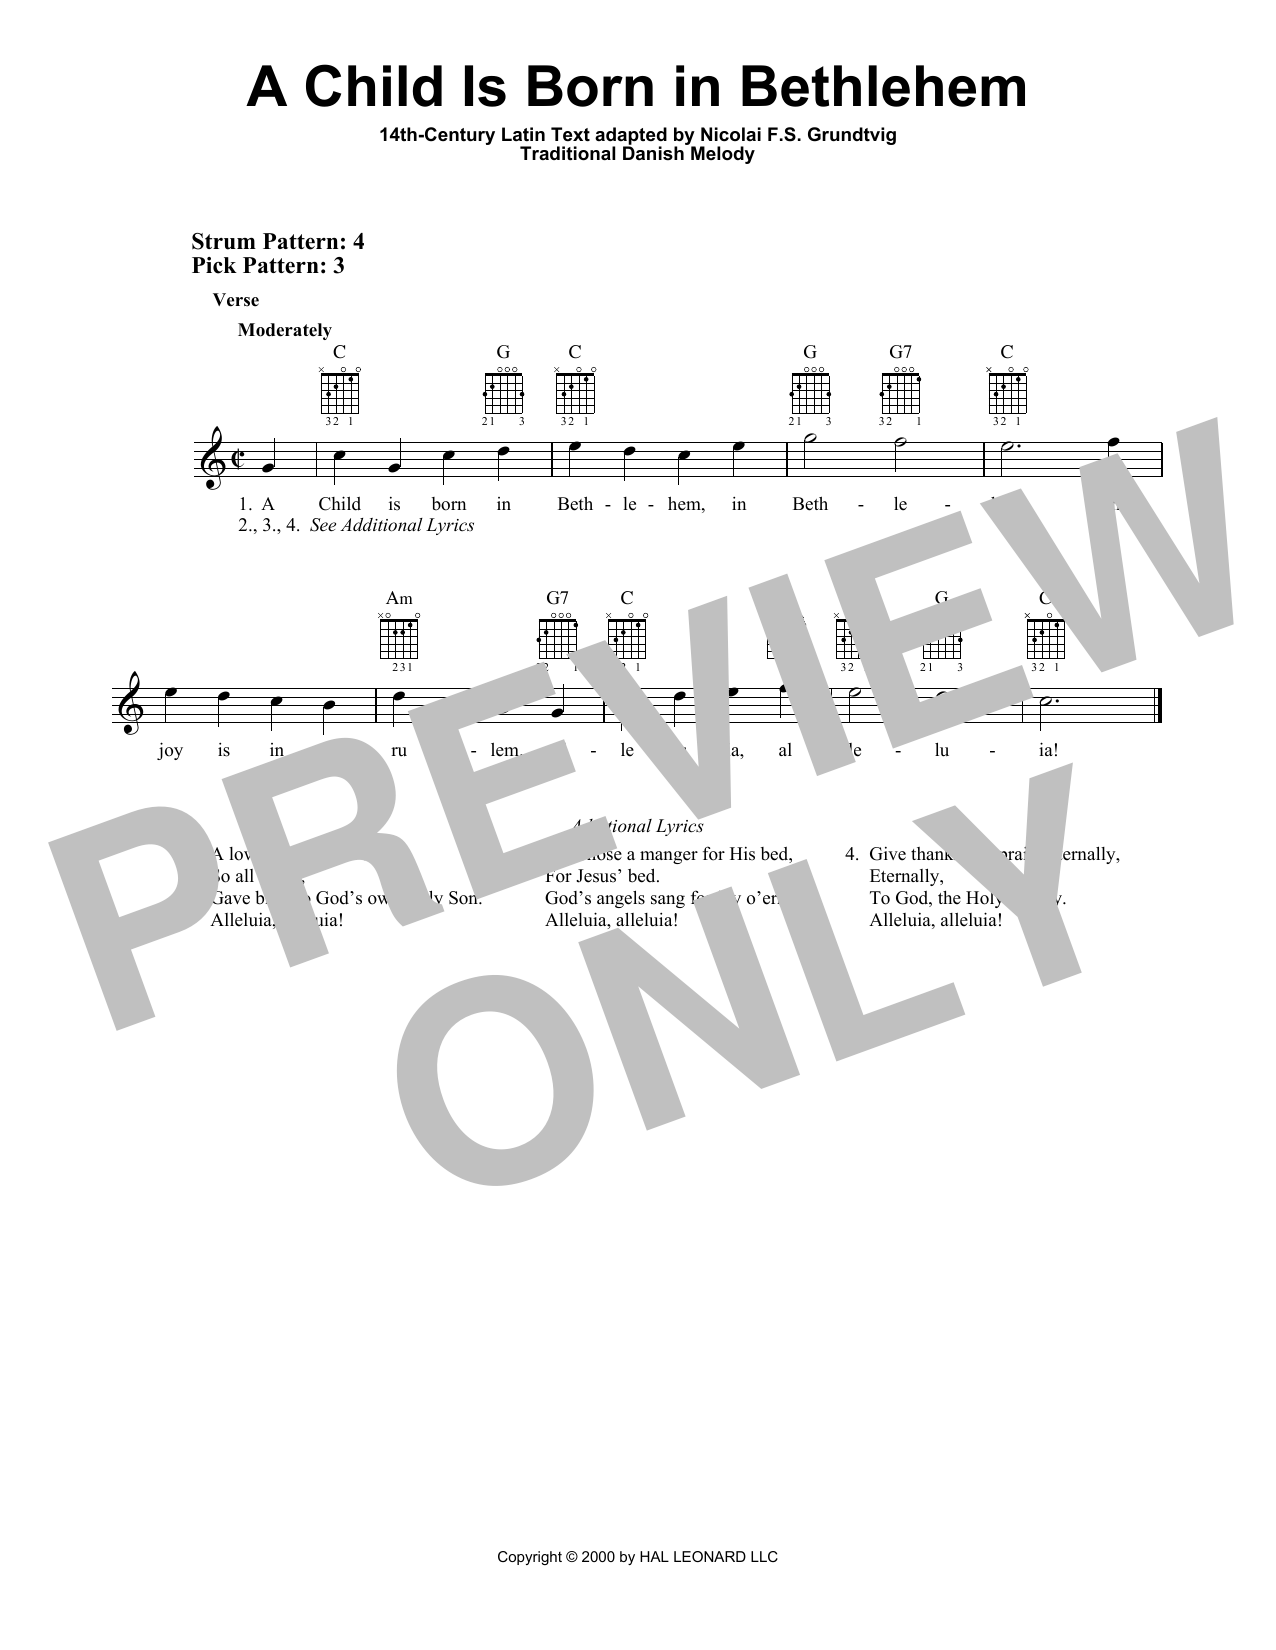 Download Nicolai F.S. Grundtvig A Child Is Born In Bethlehem Sheet Music